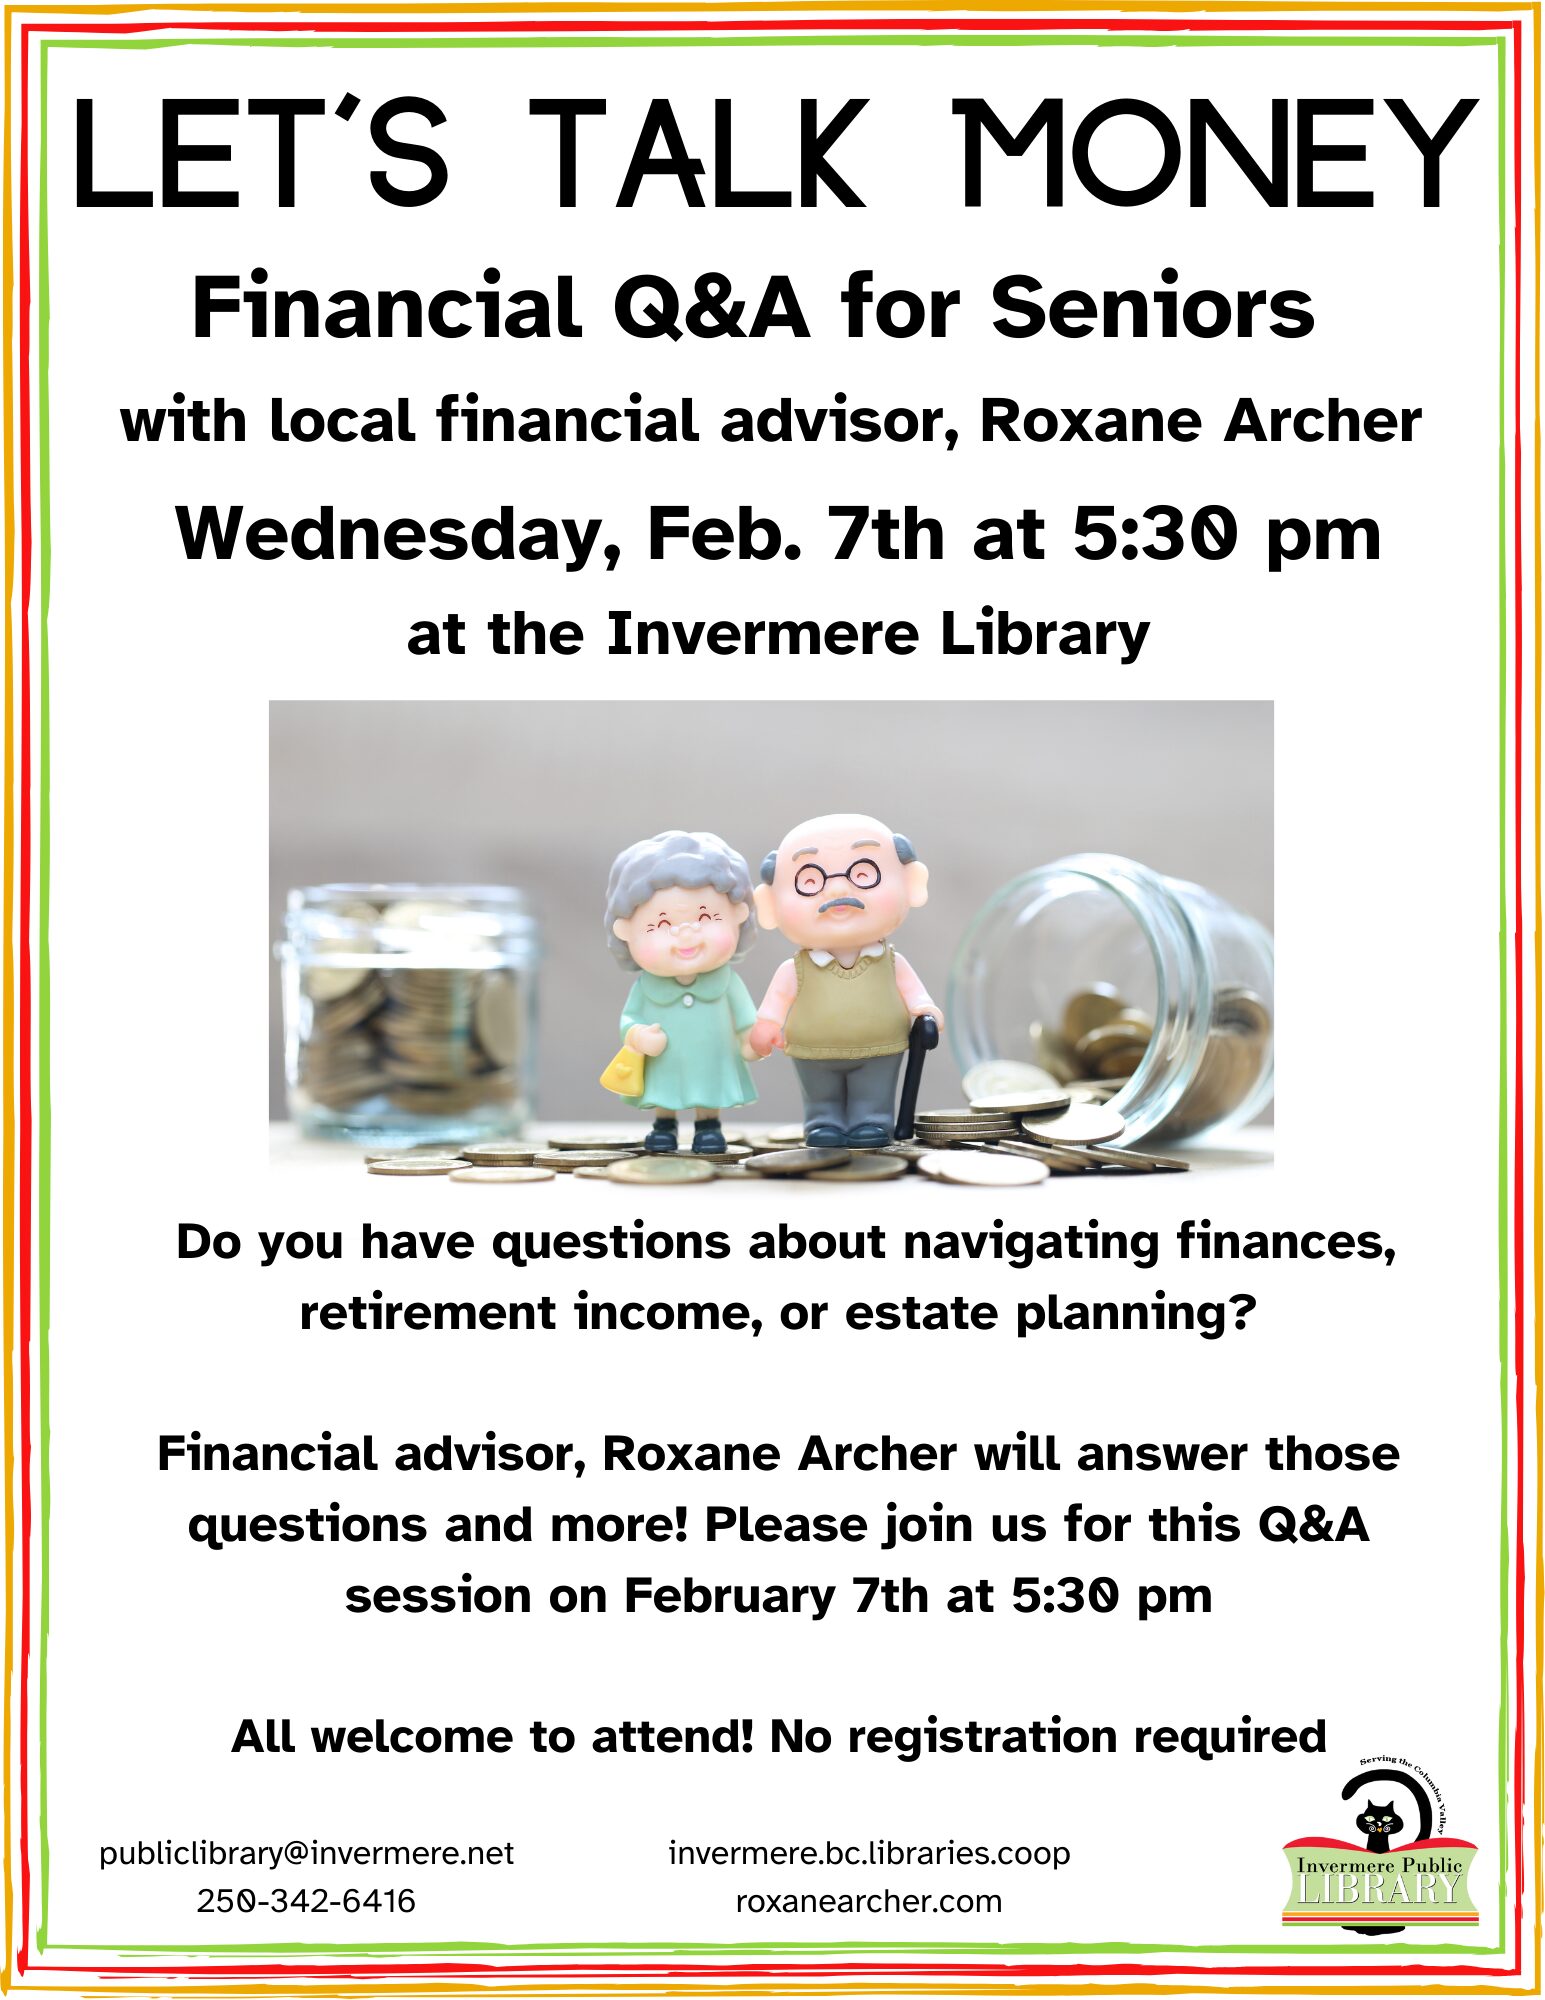 text on image is in the event description. Also a cartoon of two seniors with coins in the background.